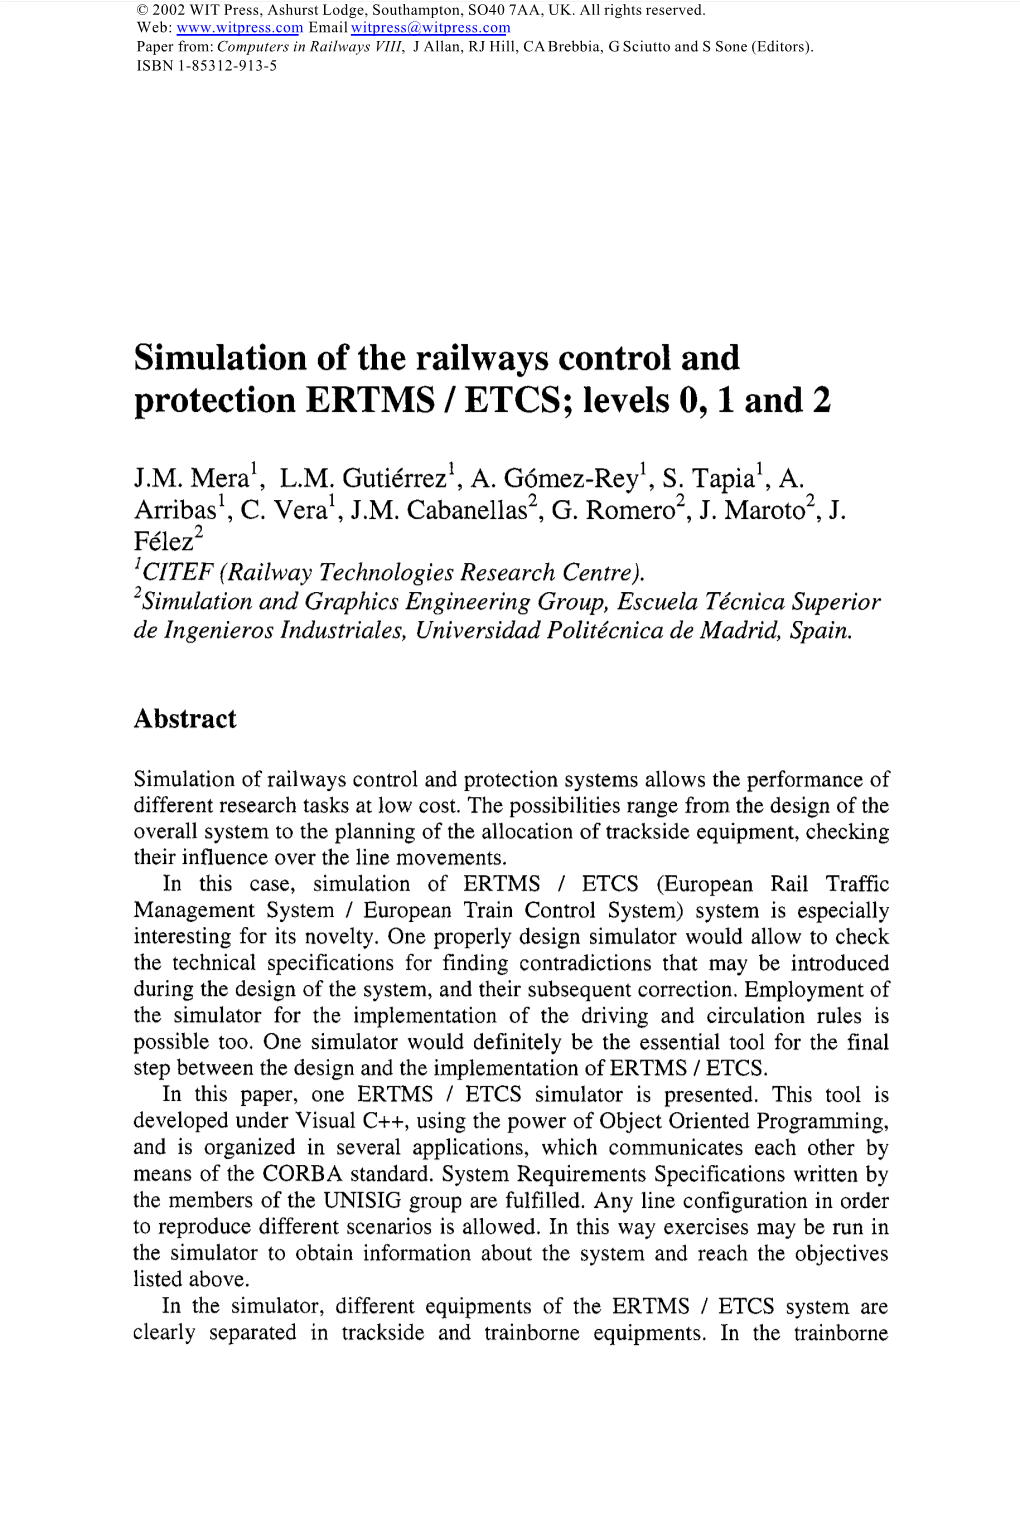 Simulation of the Railways Control and Protection ERTMS / ETCS; Levels 0,L and 2